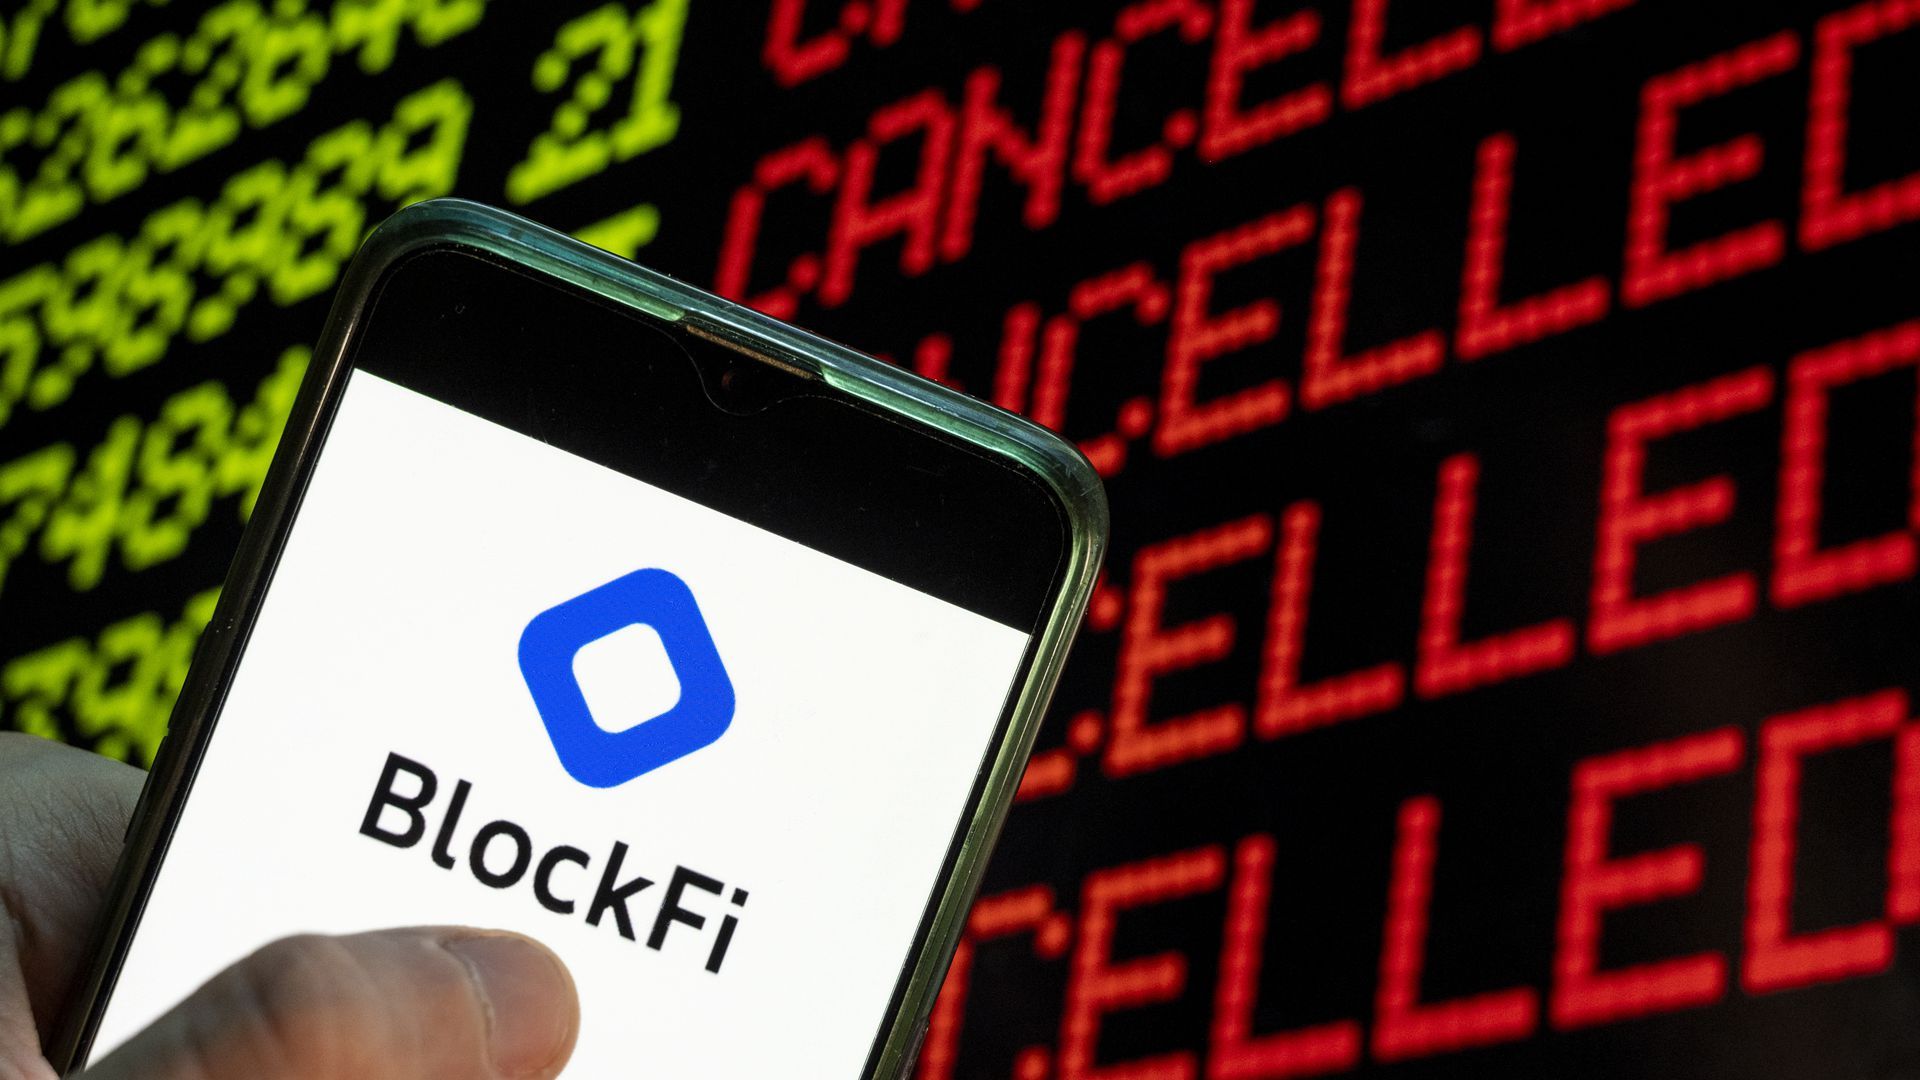 Picture of a phone with a BlockFi logo showing on the screen